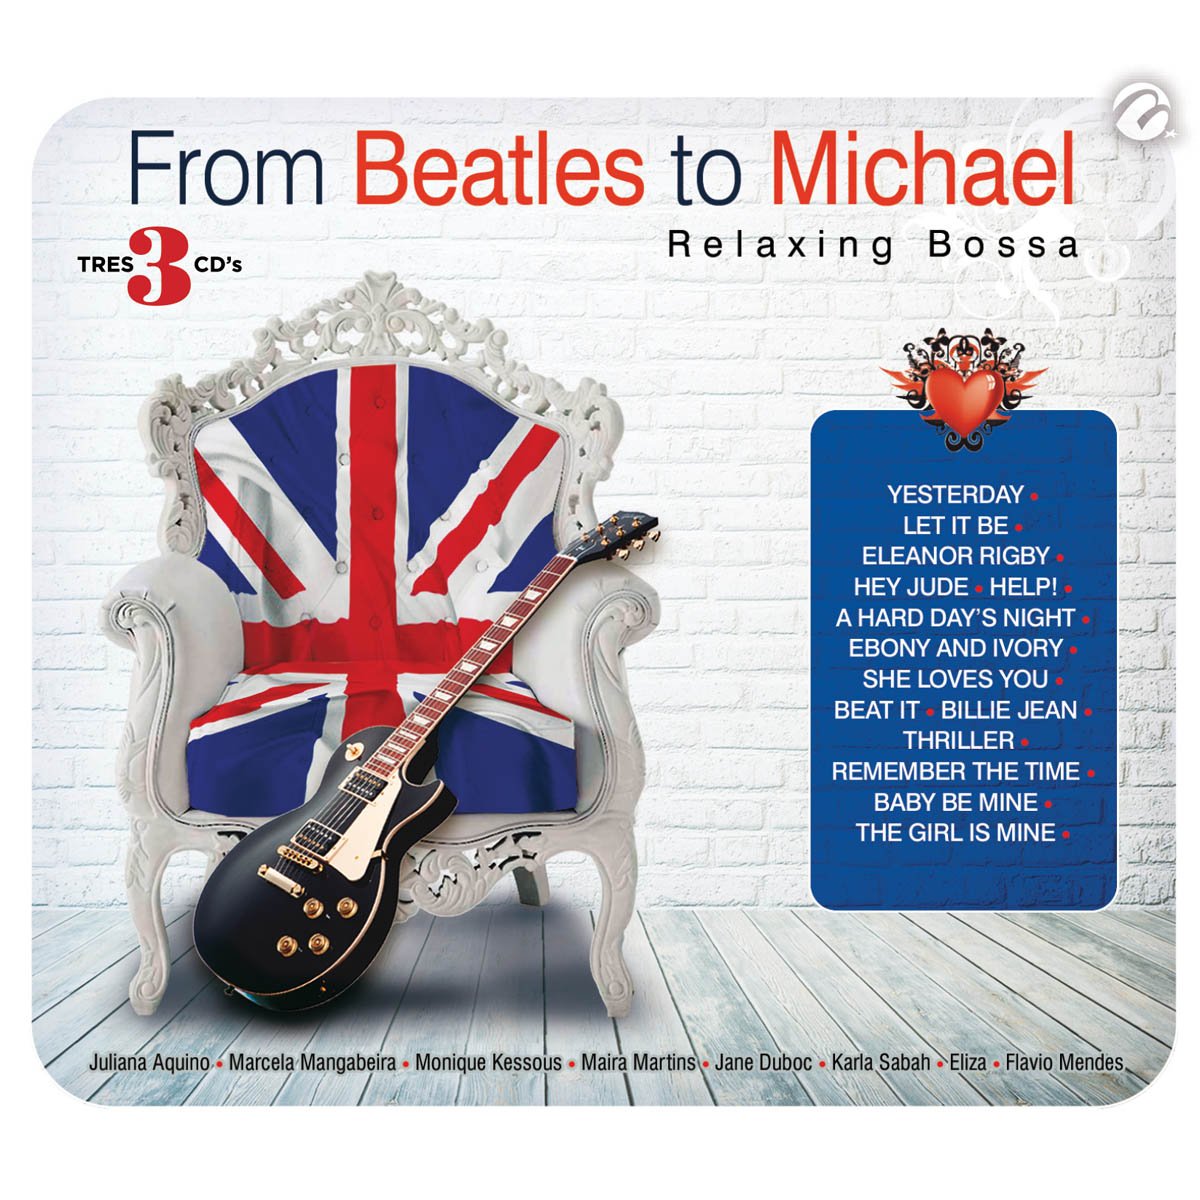 3 Cds From The Beatles To Michael Relaxing Bossa